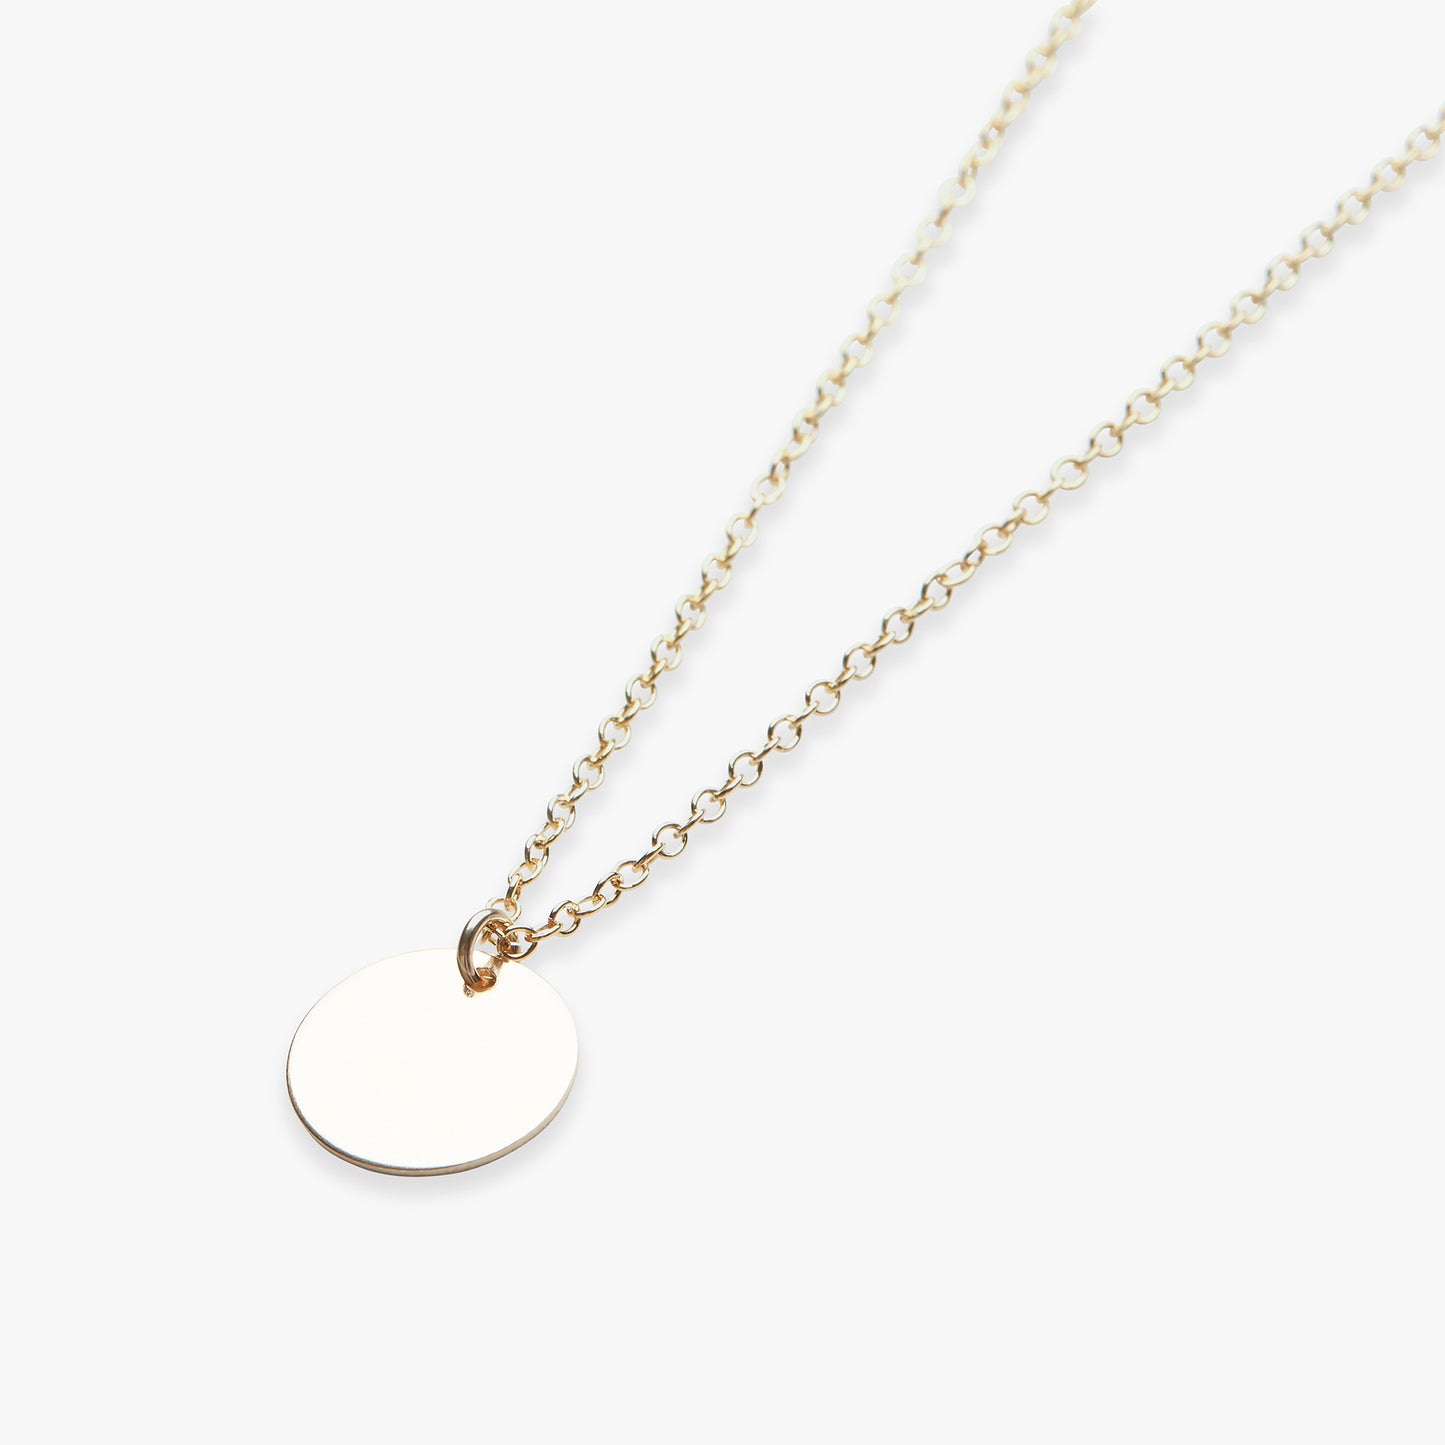 Big coin ketting gold filled